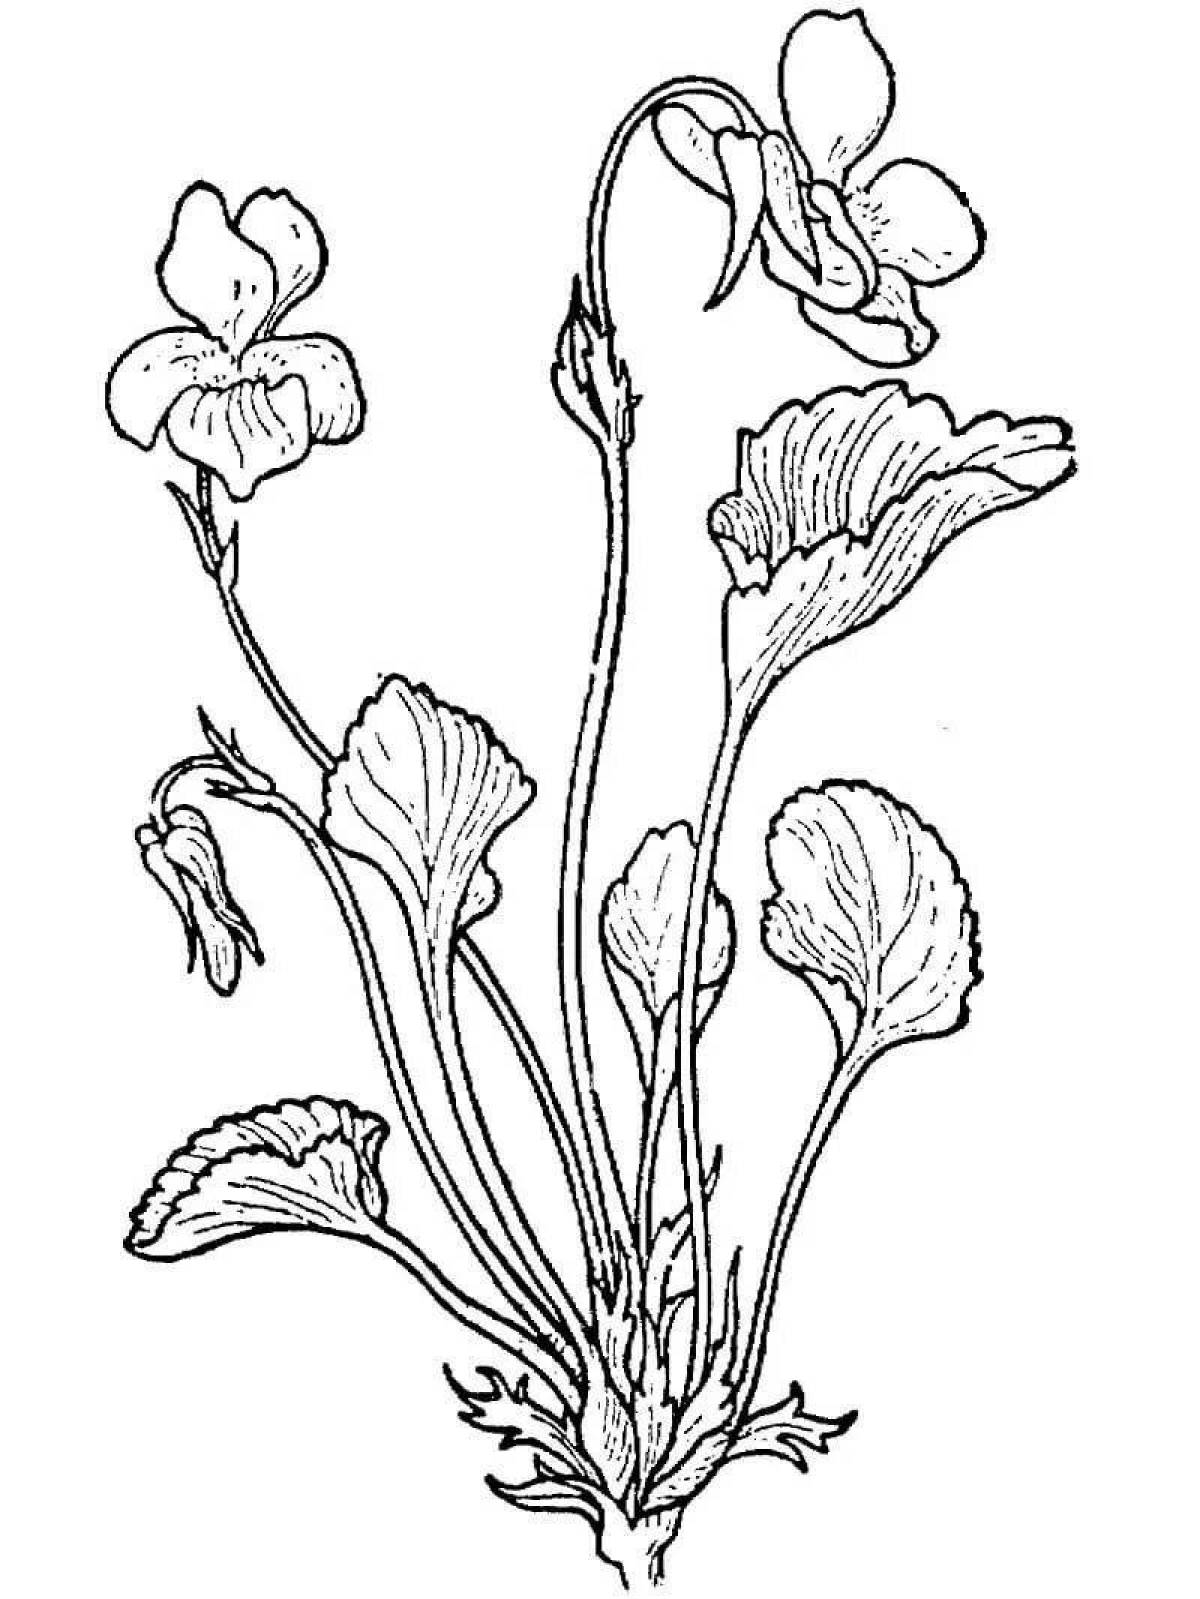 Exquisite purple flower coloring page